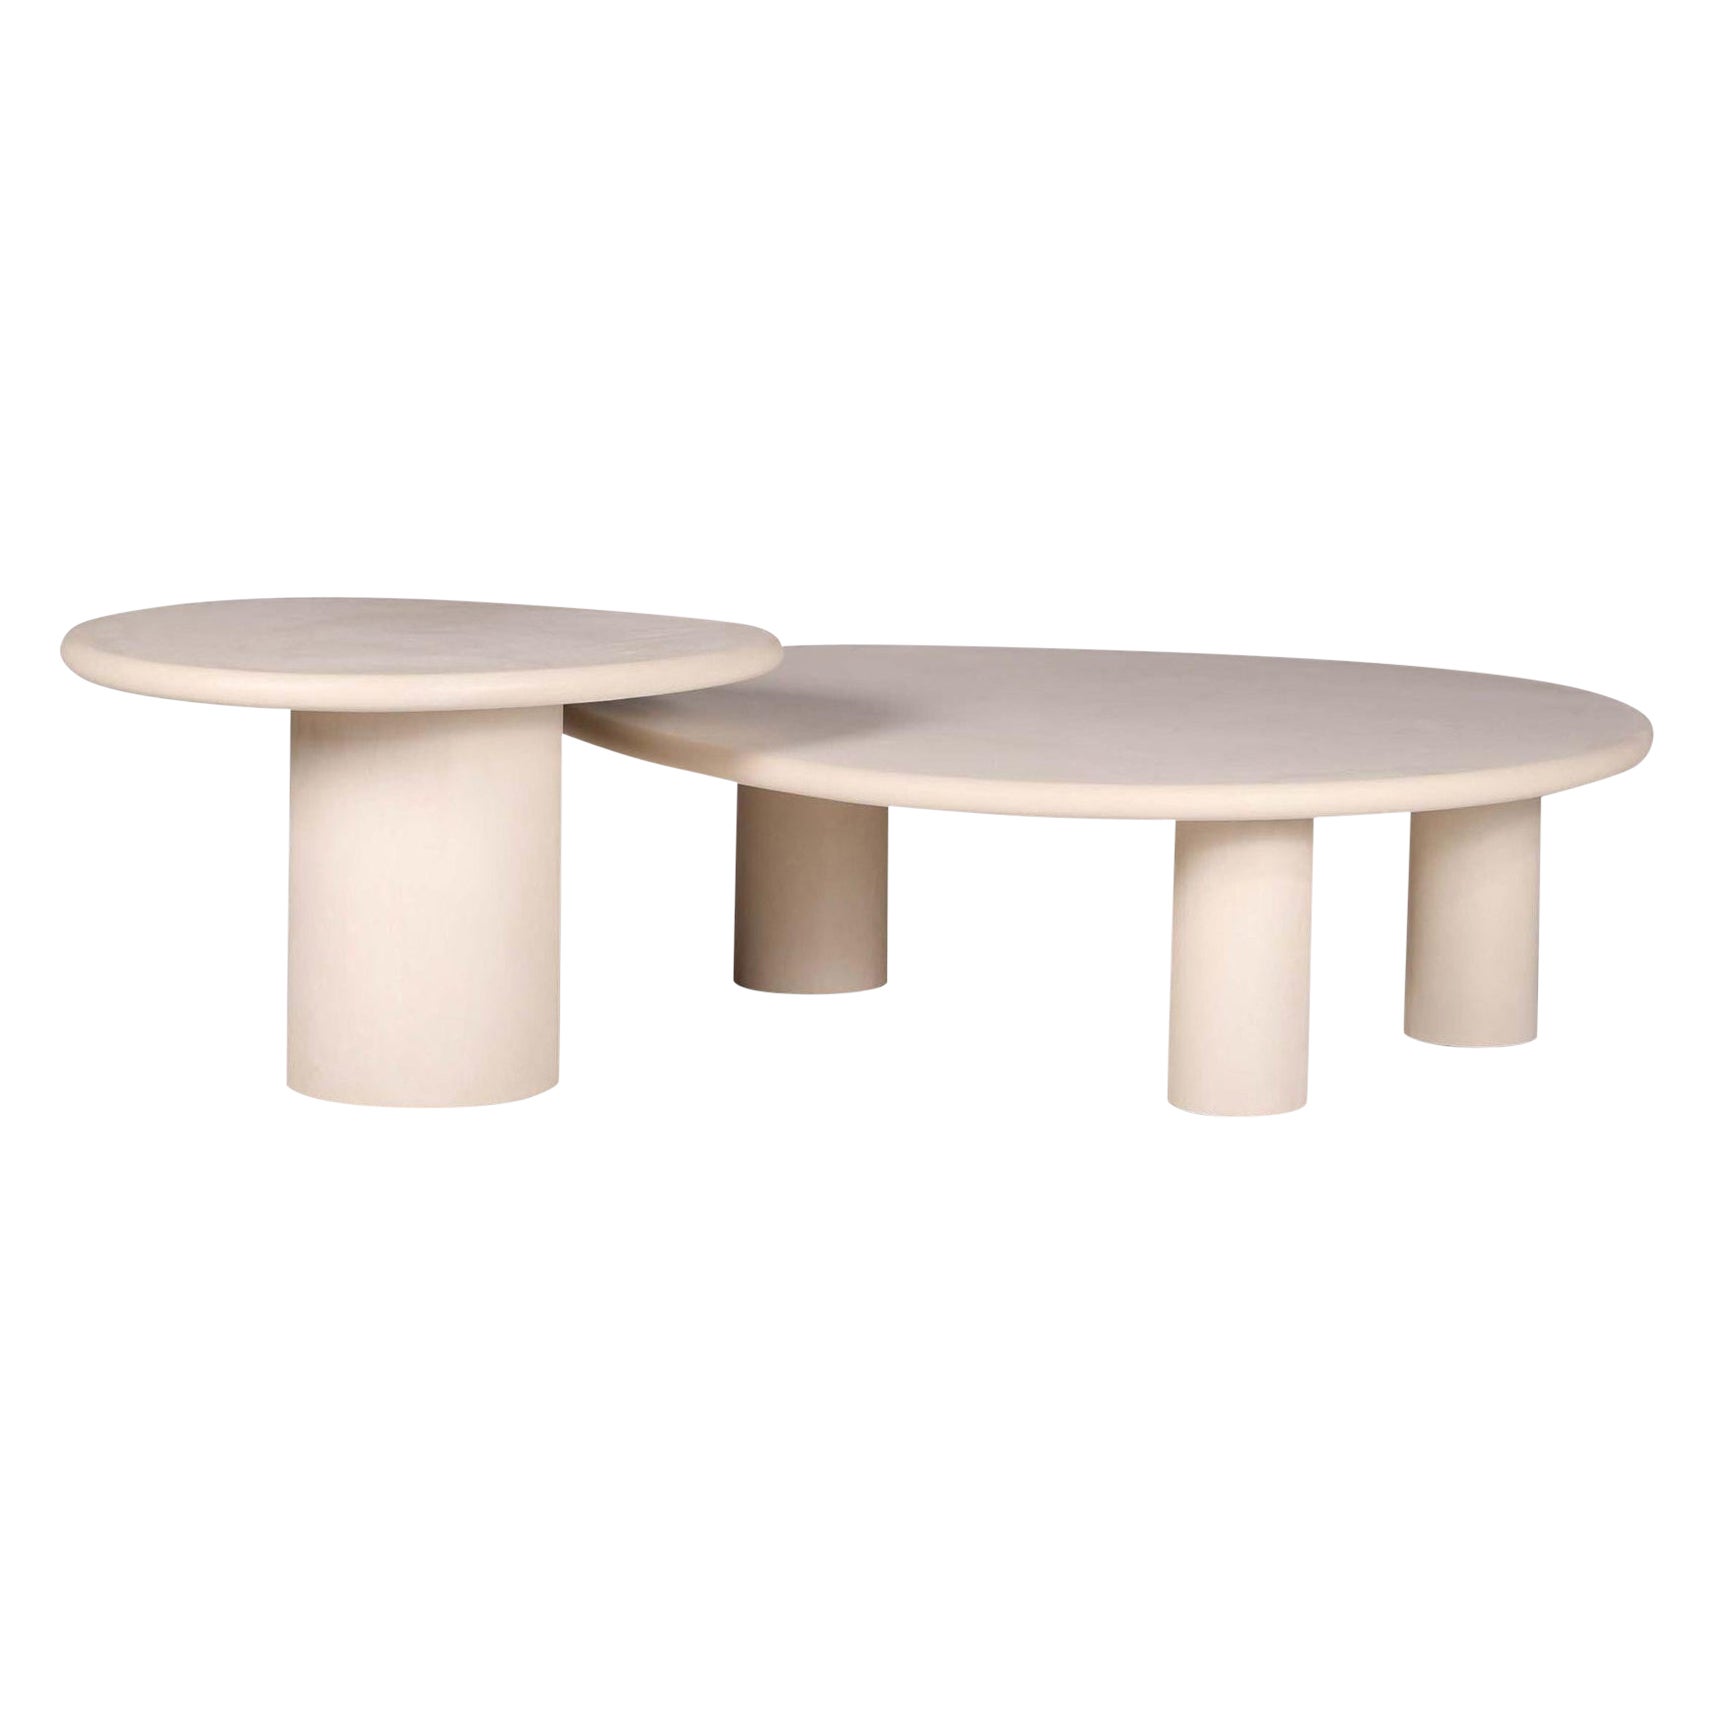 Handmade Outdoor Rock-Shaped Natural Plaster Table Set by Philippe Colette For Sale